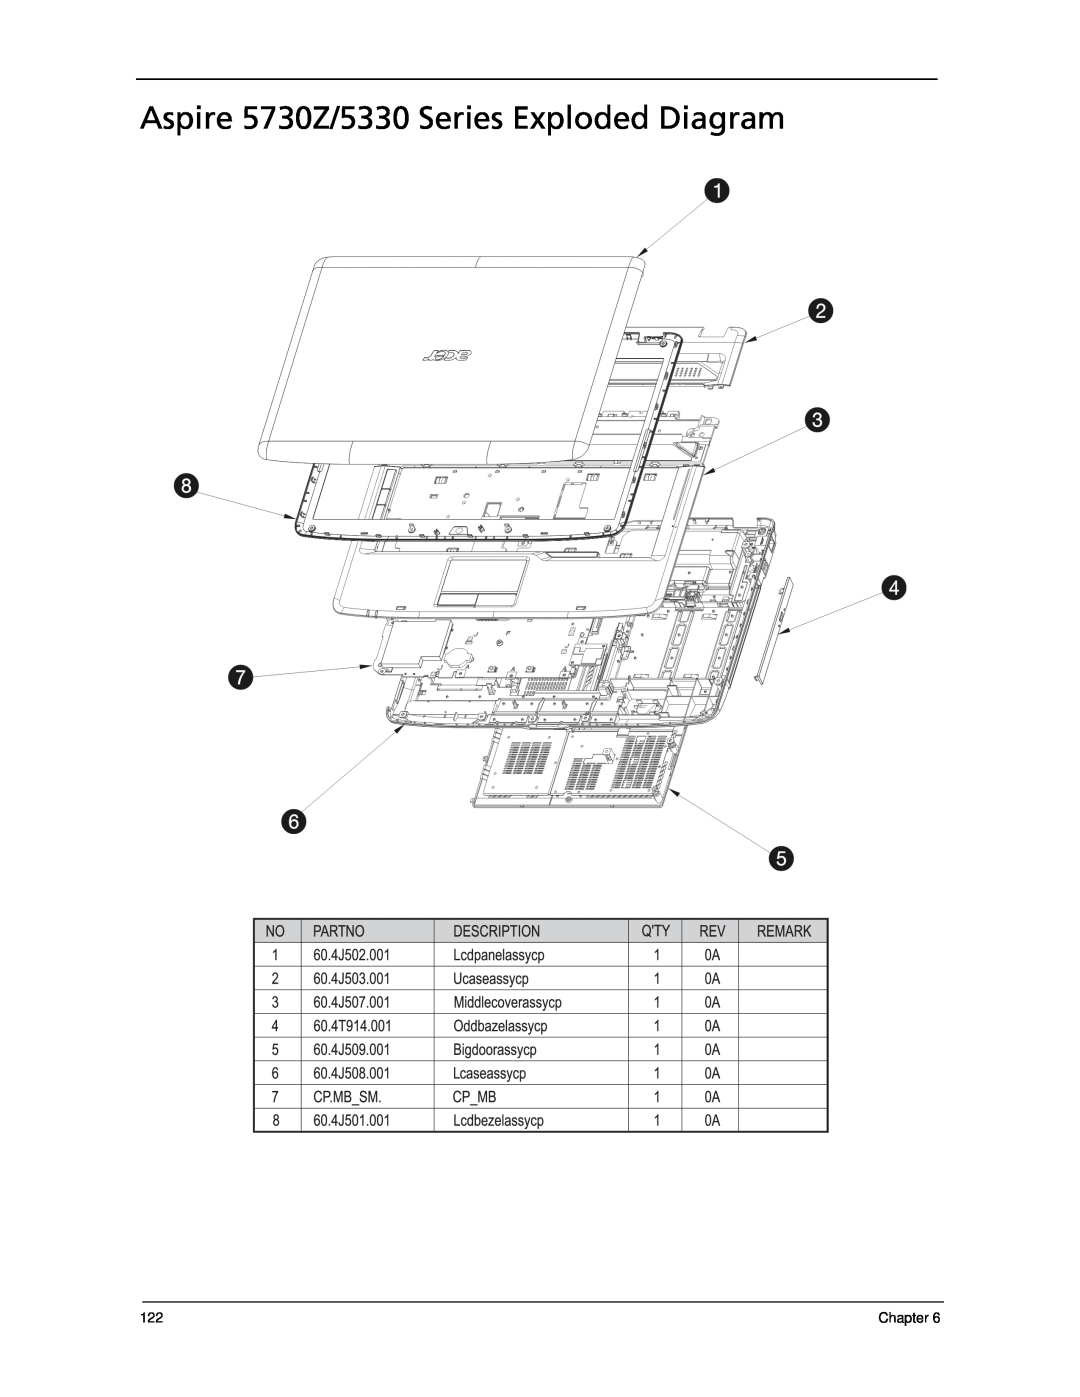 Acer manual Aspire 5730Z/5330 Series Exploded Diagram, Chapter 